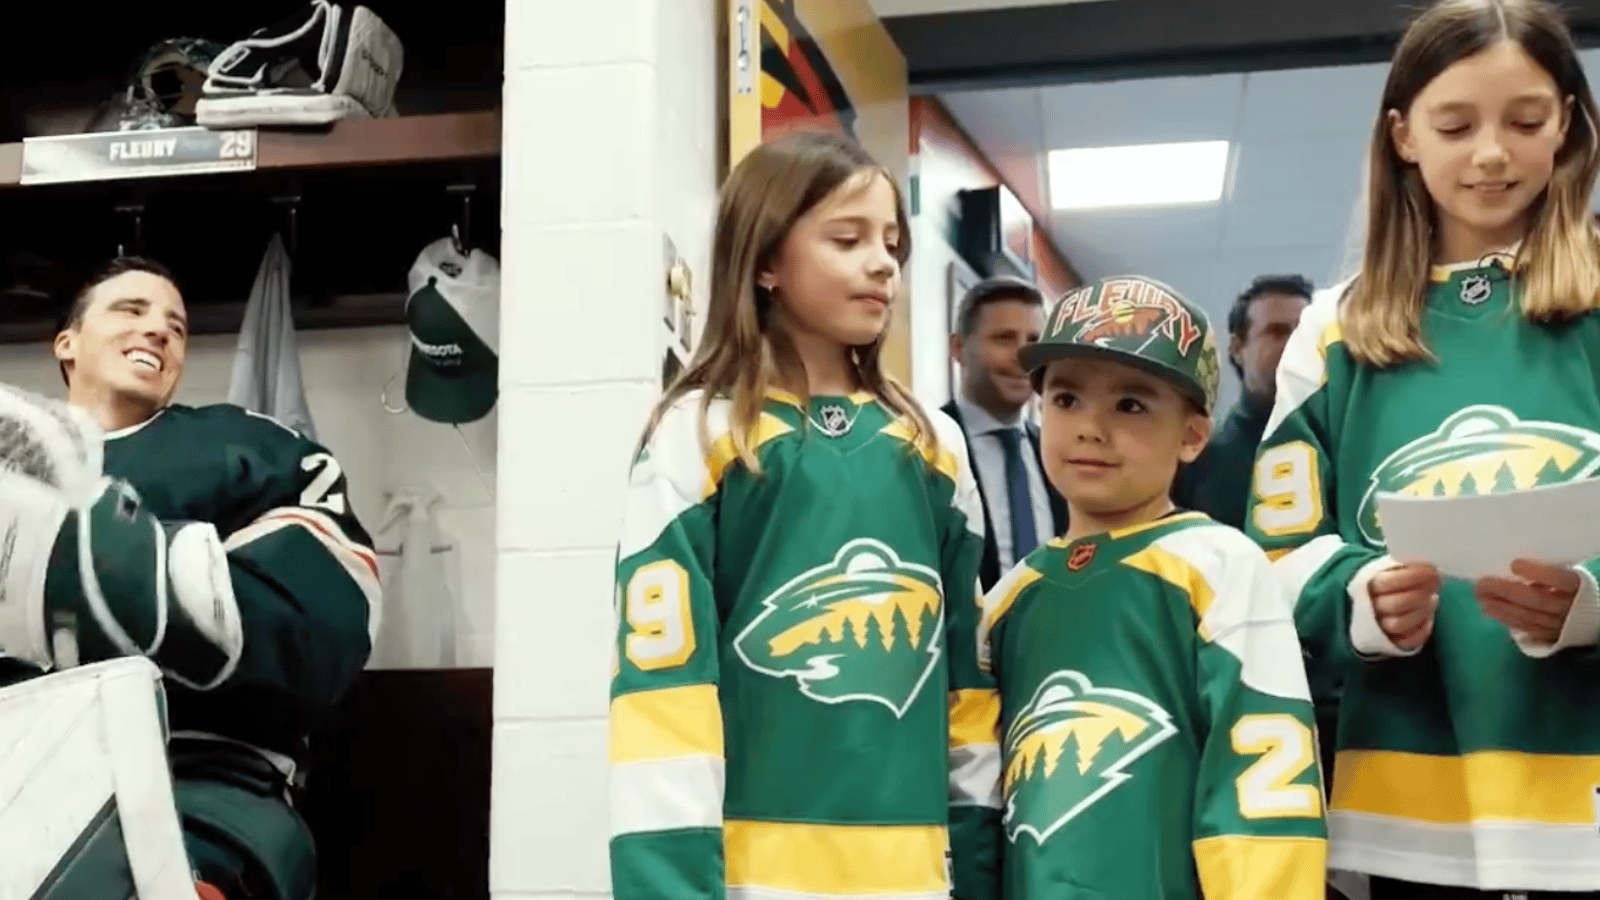 Marc-Andre Fleury's kids steal the show